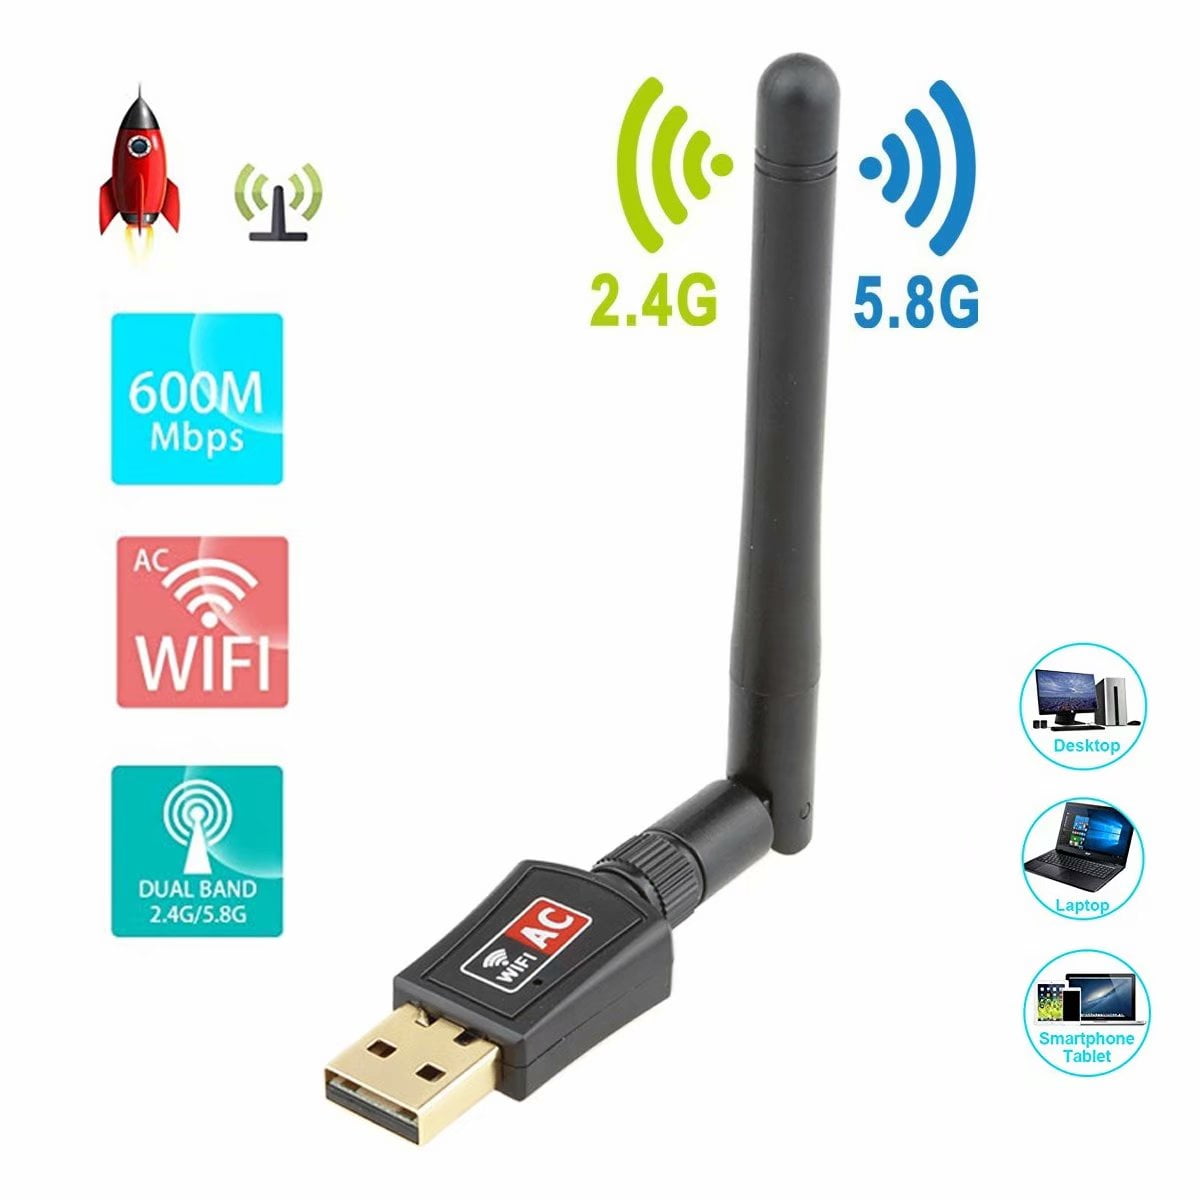 600M USB Wifi Adapter Dual Band 2.4G/5.8G Bluetooth Wireless for Laptop PC 